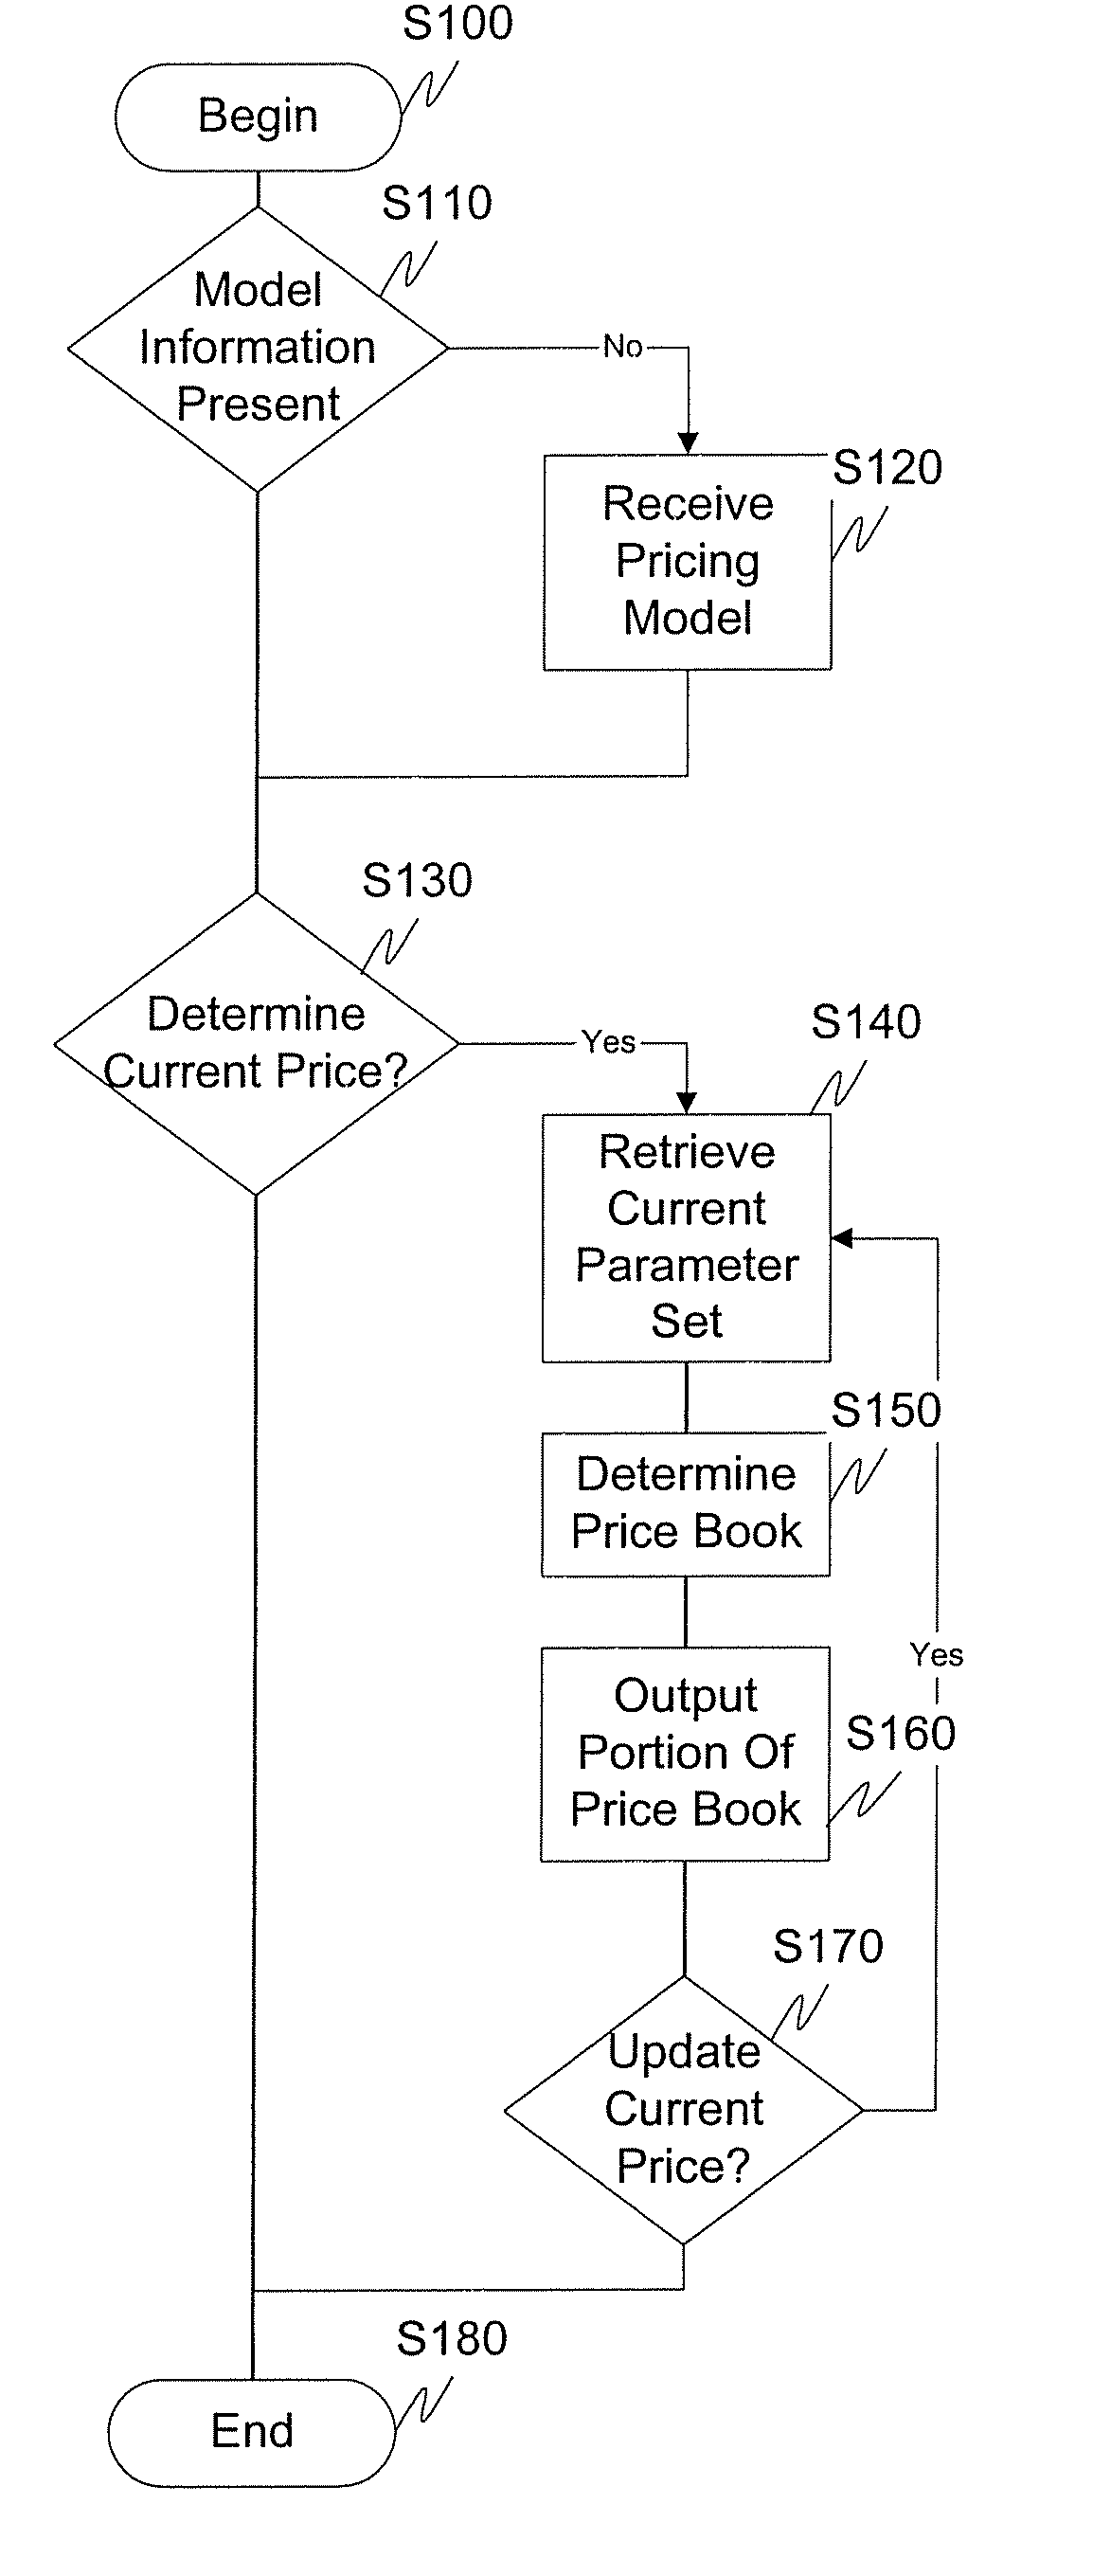 Systems and methods for information management over a distributed network